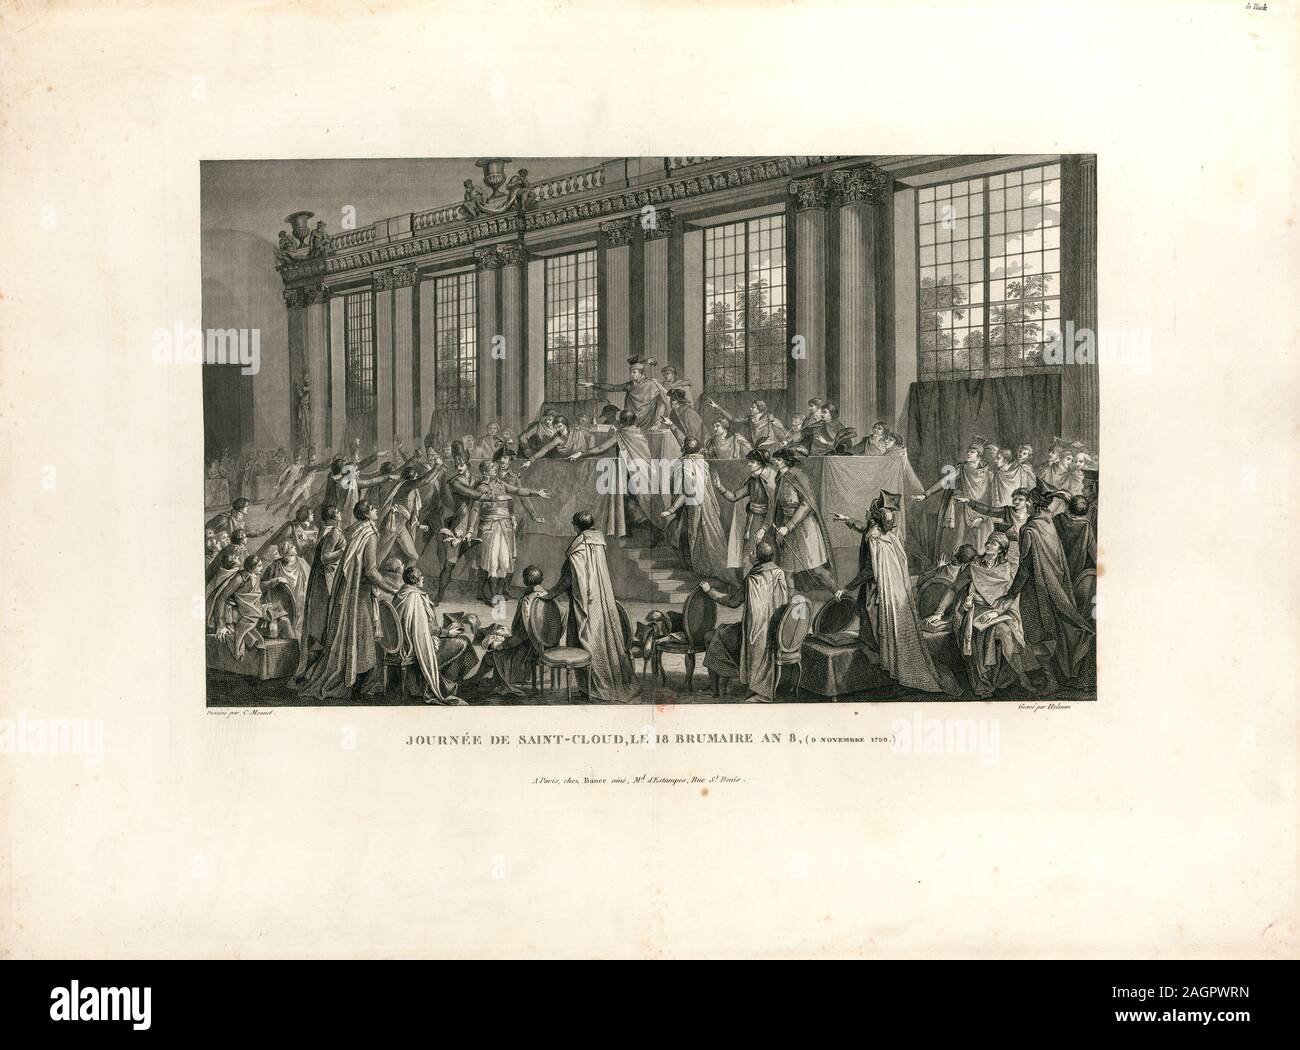 Coup of 18 Brumaire. Museum: BIBLIOTHEQUE NATIONALE DE FRANCE. Author: ISIDORE STANISLAS HELMAN. Stock Photo